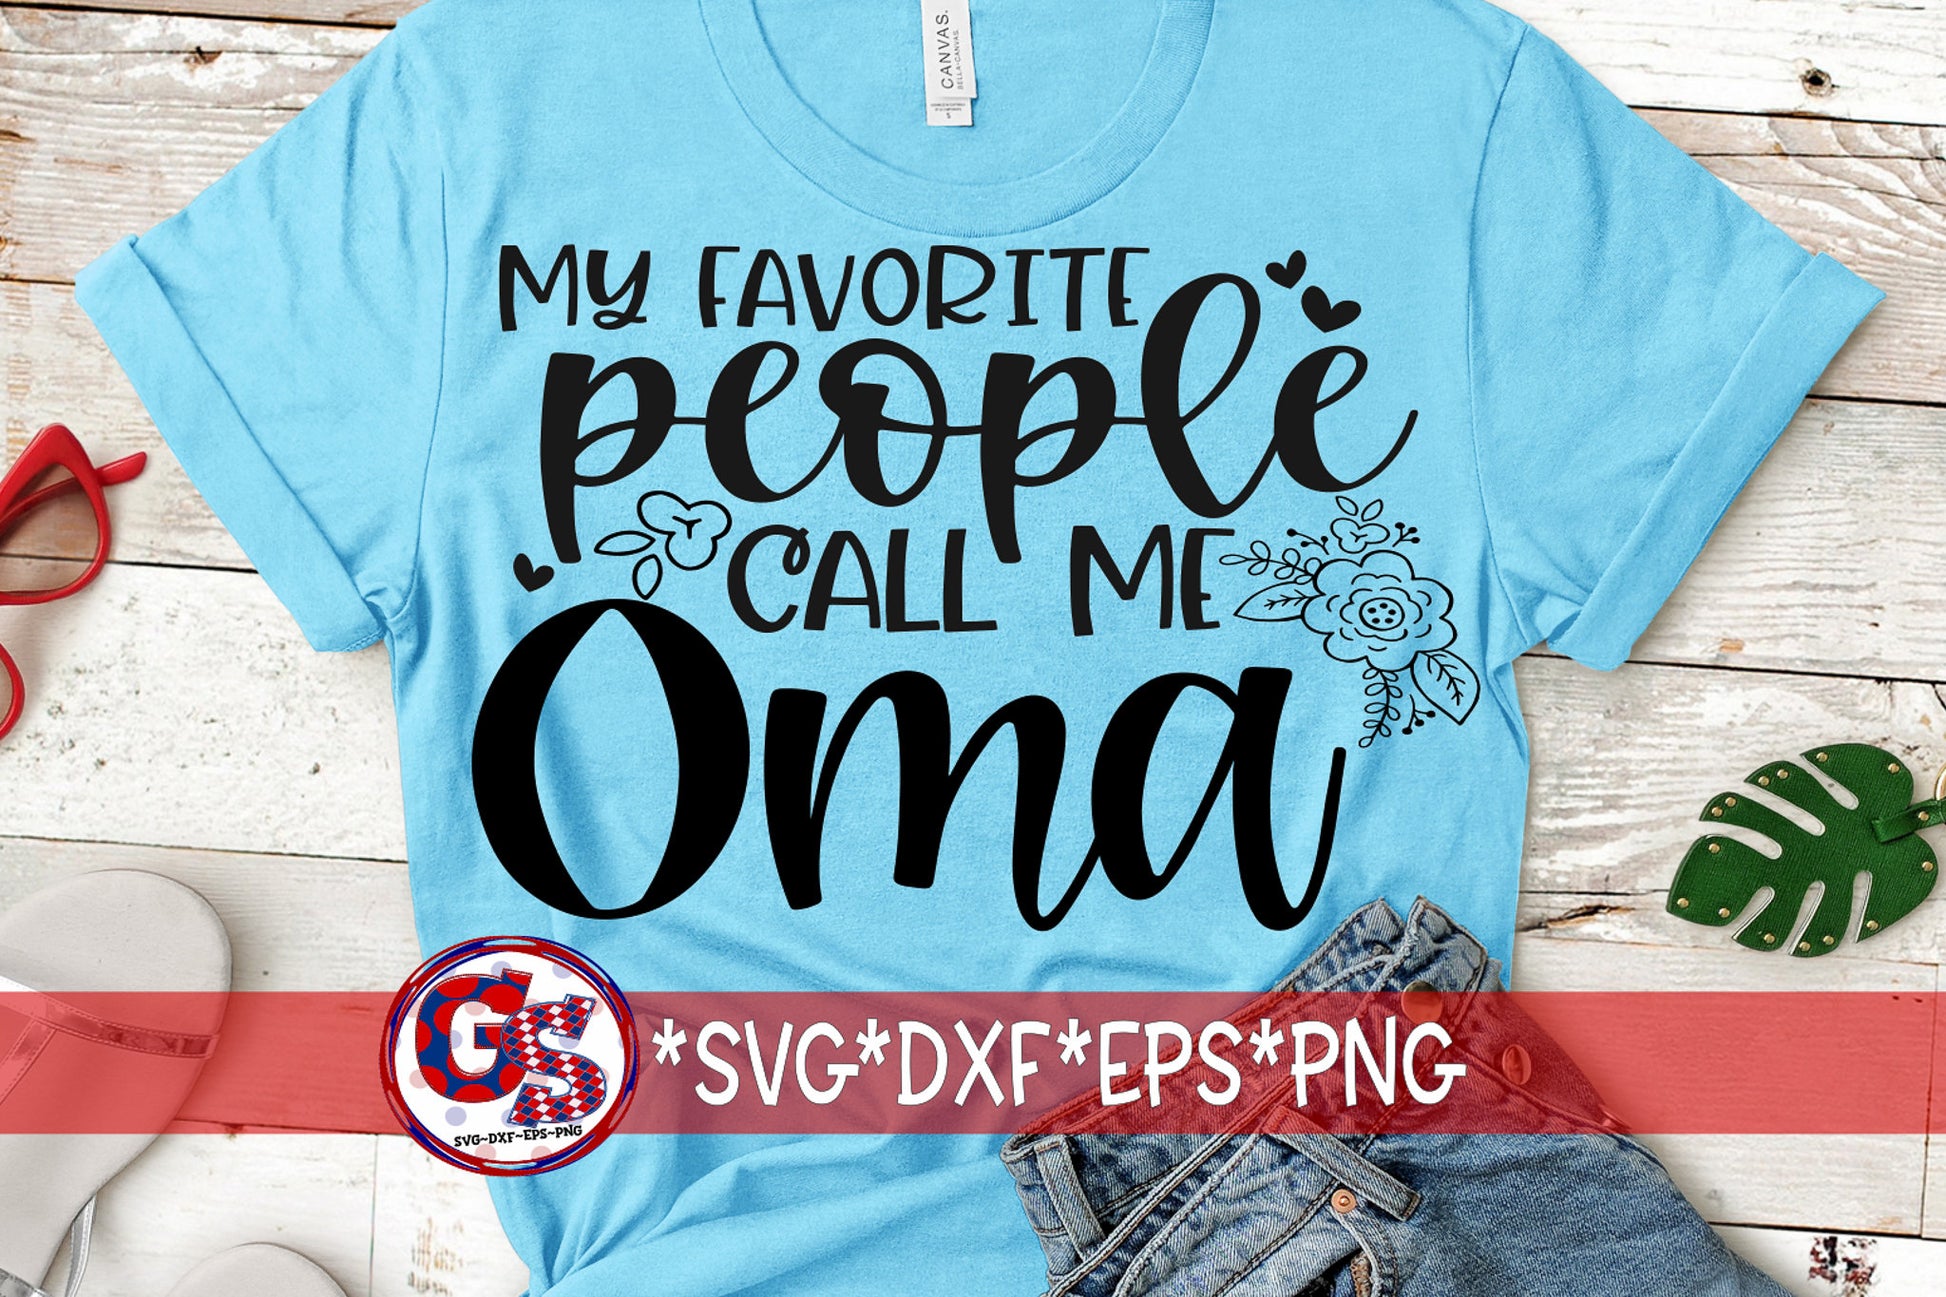 My Favorite People Call Me Oma svg, dxf, eps, png. Oma SVG | Oma DxF | Favorite Oma SvG | Mother&#39;s Day SVG | instant Download Cut Files.